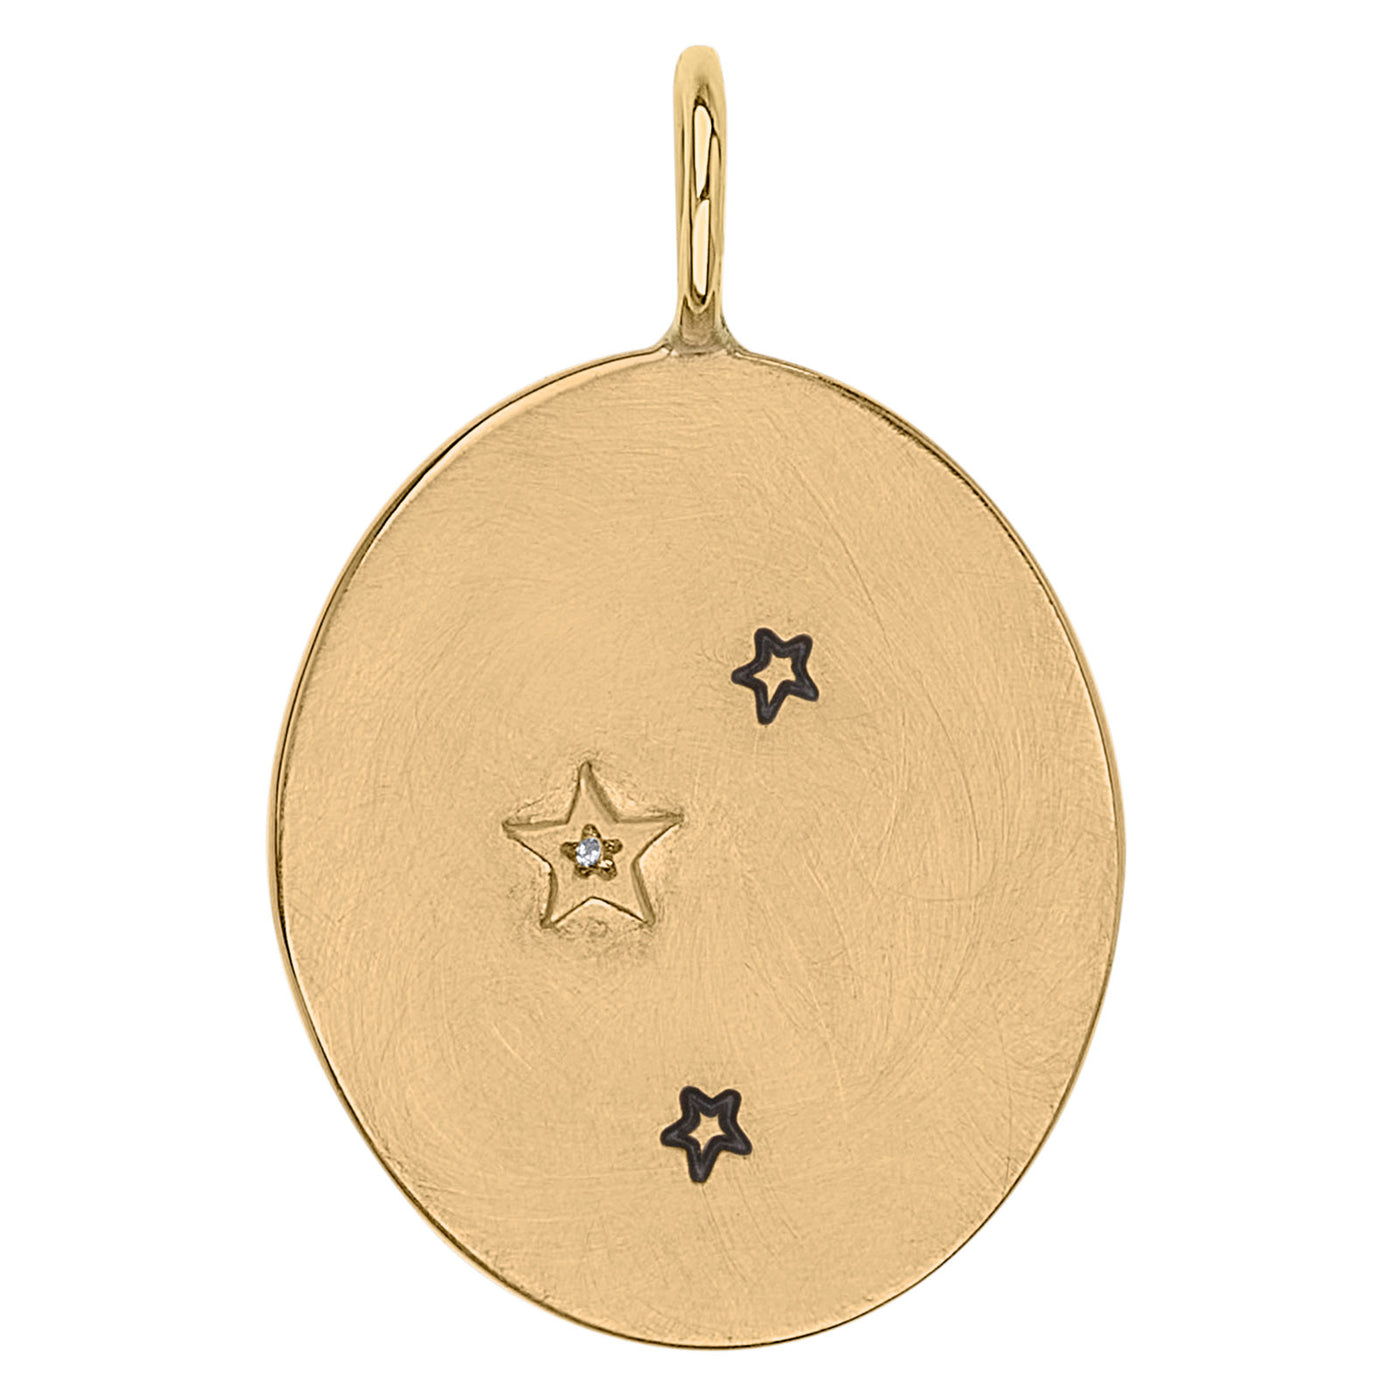 Gold Good Vibes Oval Charm